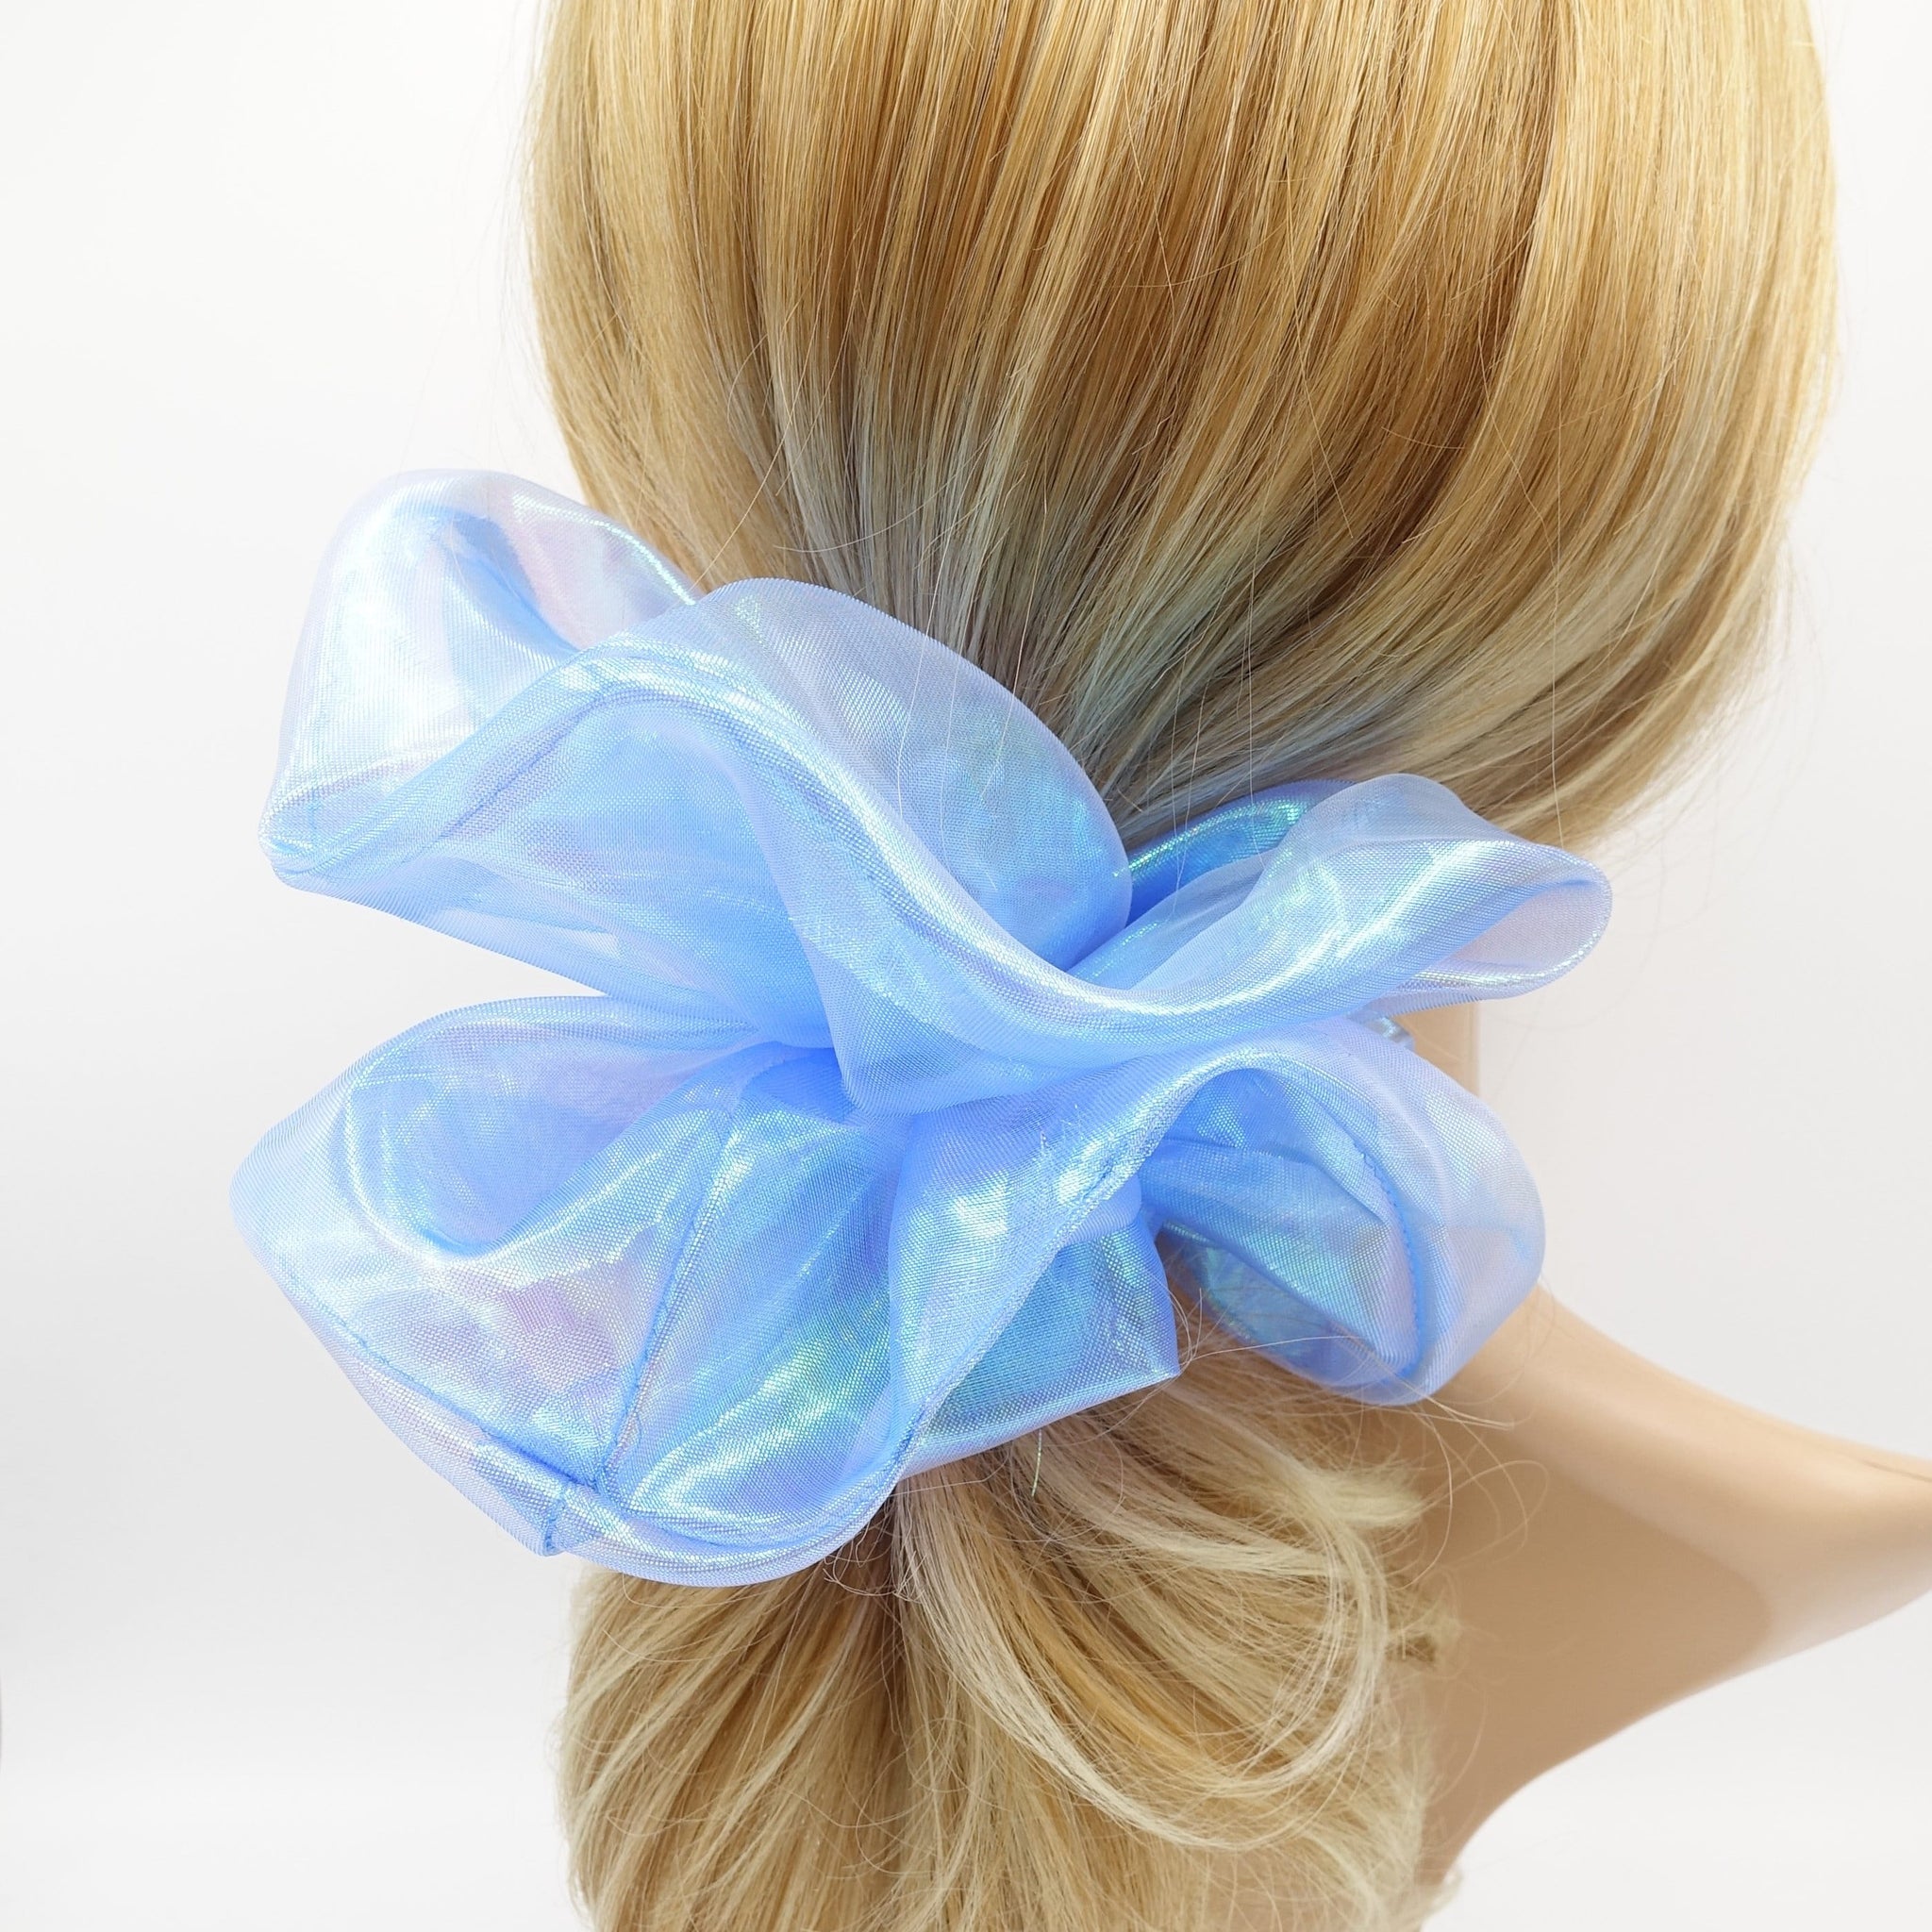 veryshine.com Scrunchies White organza scrunchies, dragonfly oversized scrunchies iridescent fabric hair tie stylish hair accessory  for women